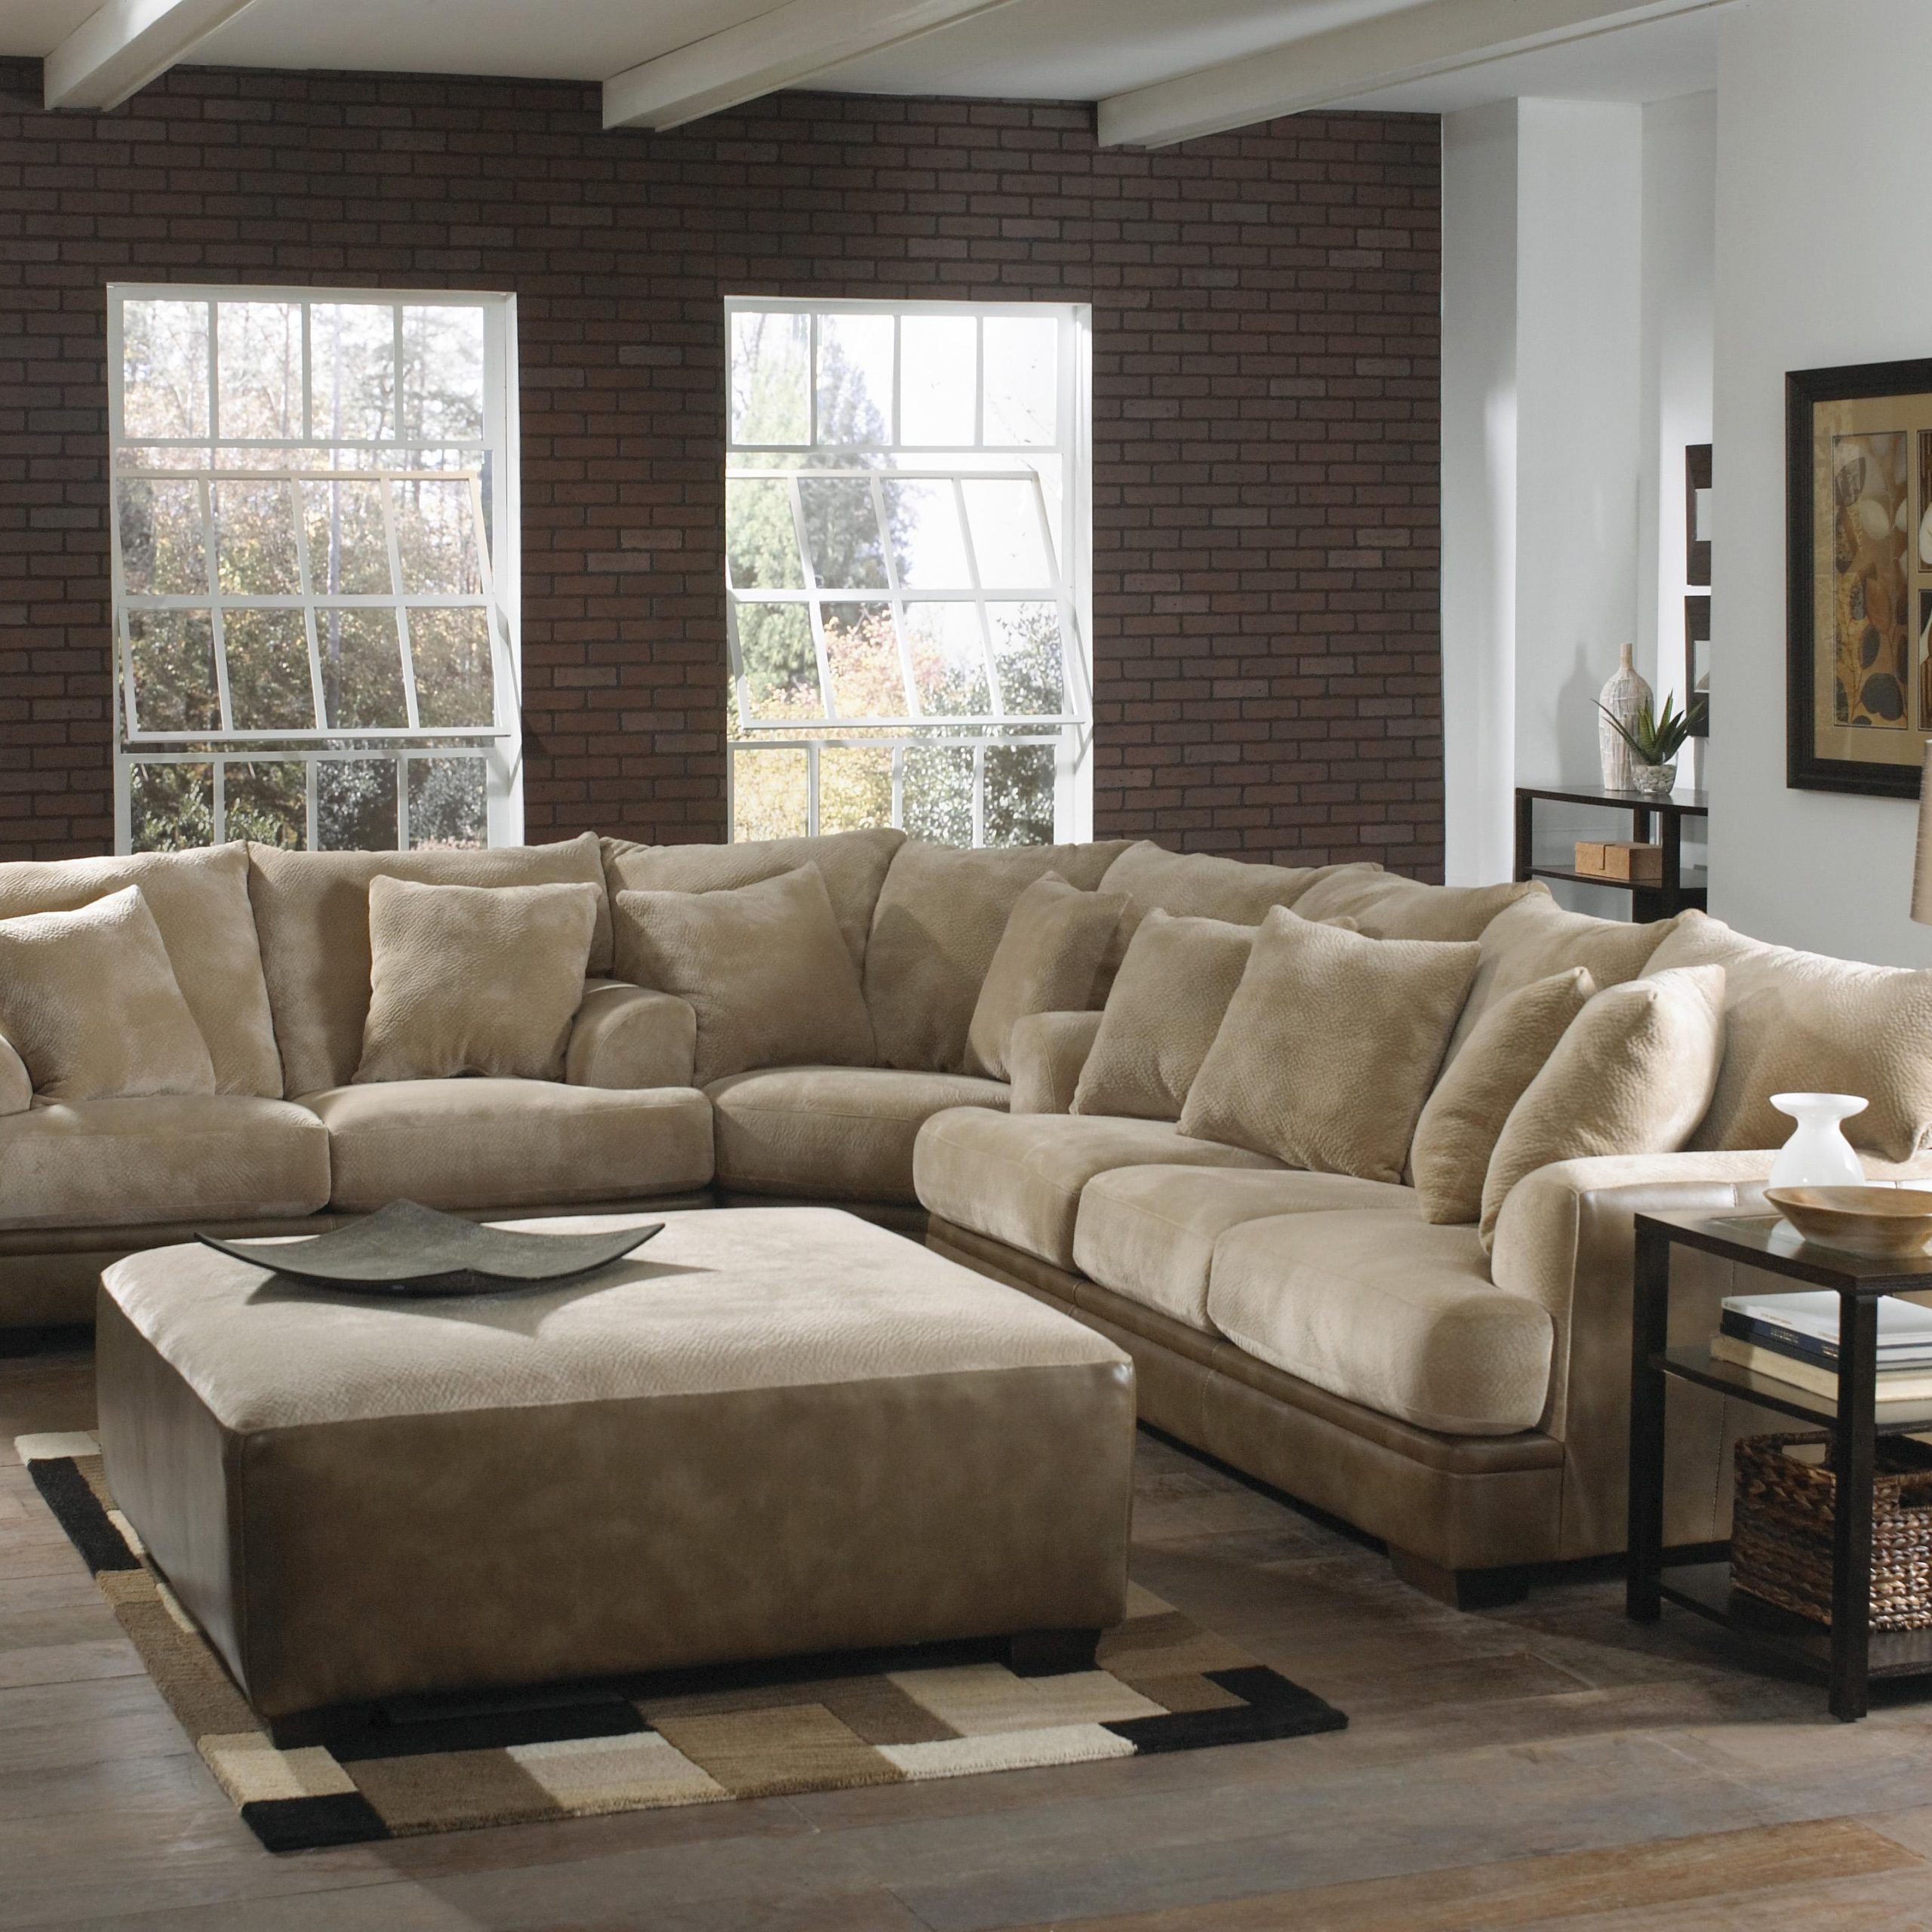 Barkley Large L Shaped Sectional Sofa With Left Side Loveseat In Modern L Shaped Sofa Sectionals (View 19 of 20)